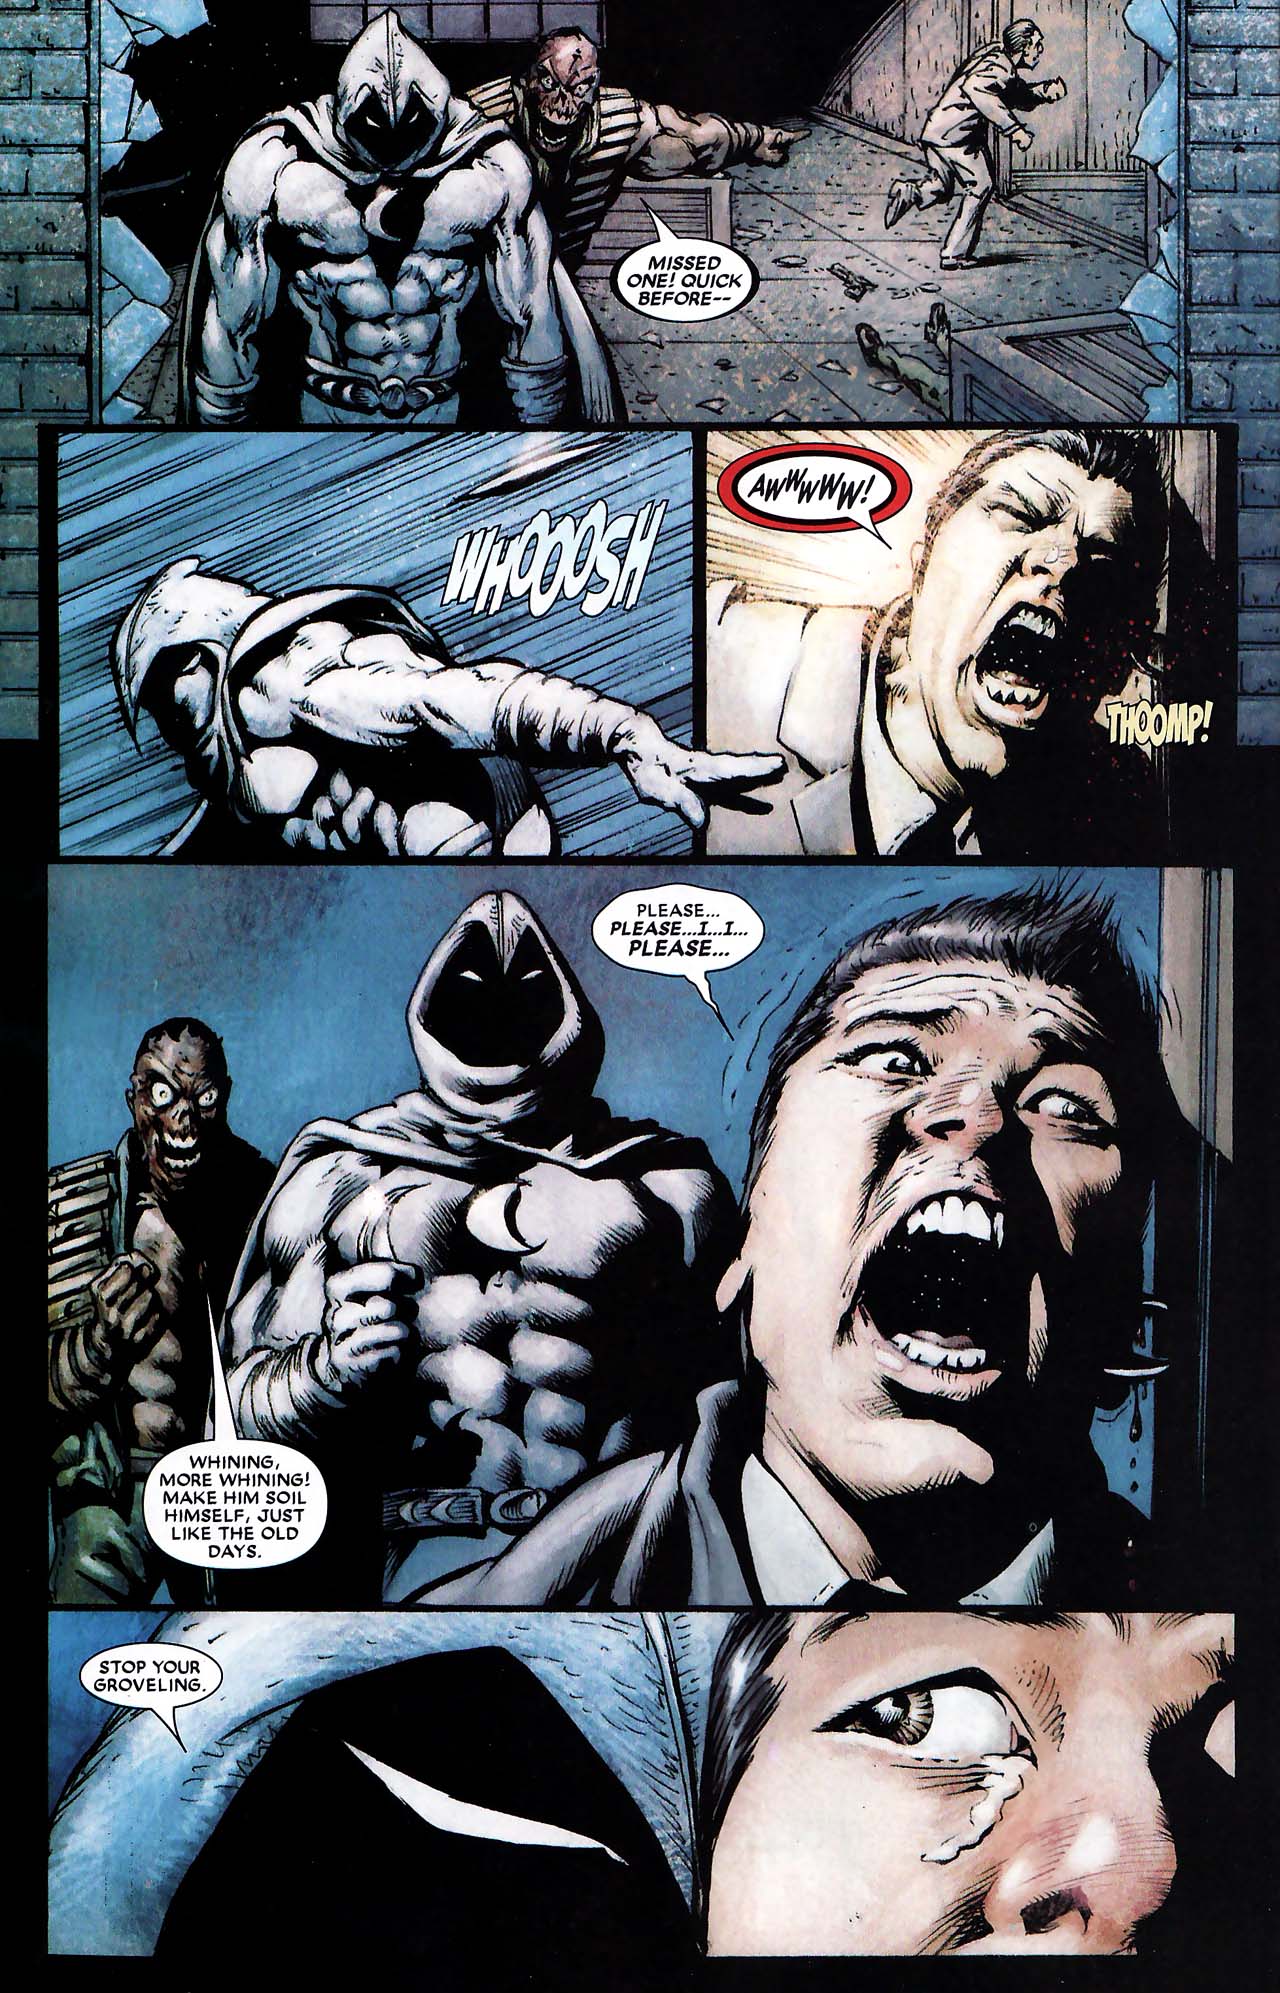  Moon Knight #14 - God And Country, Part One